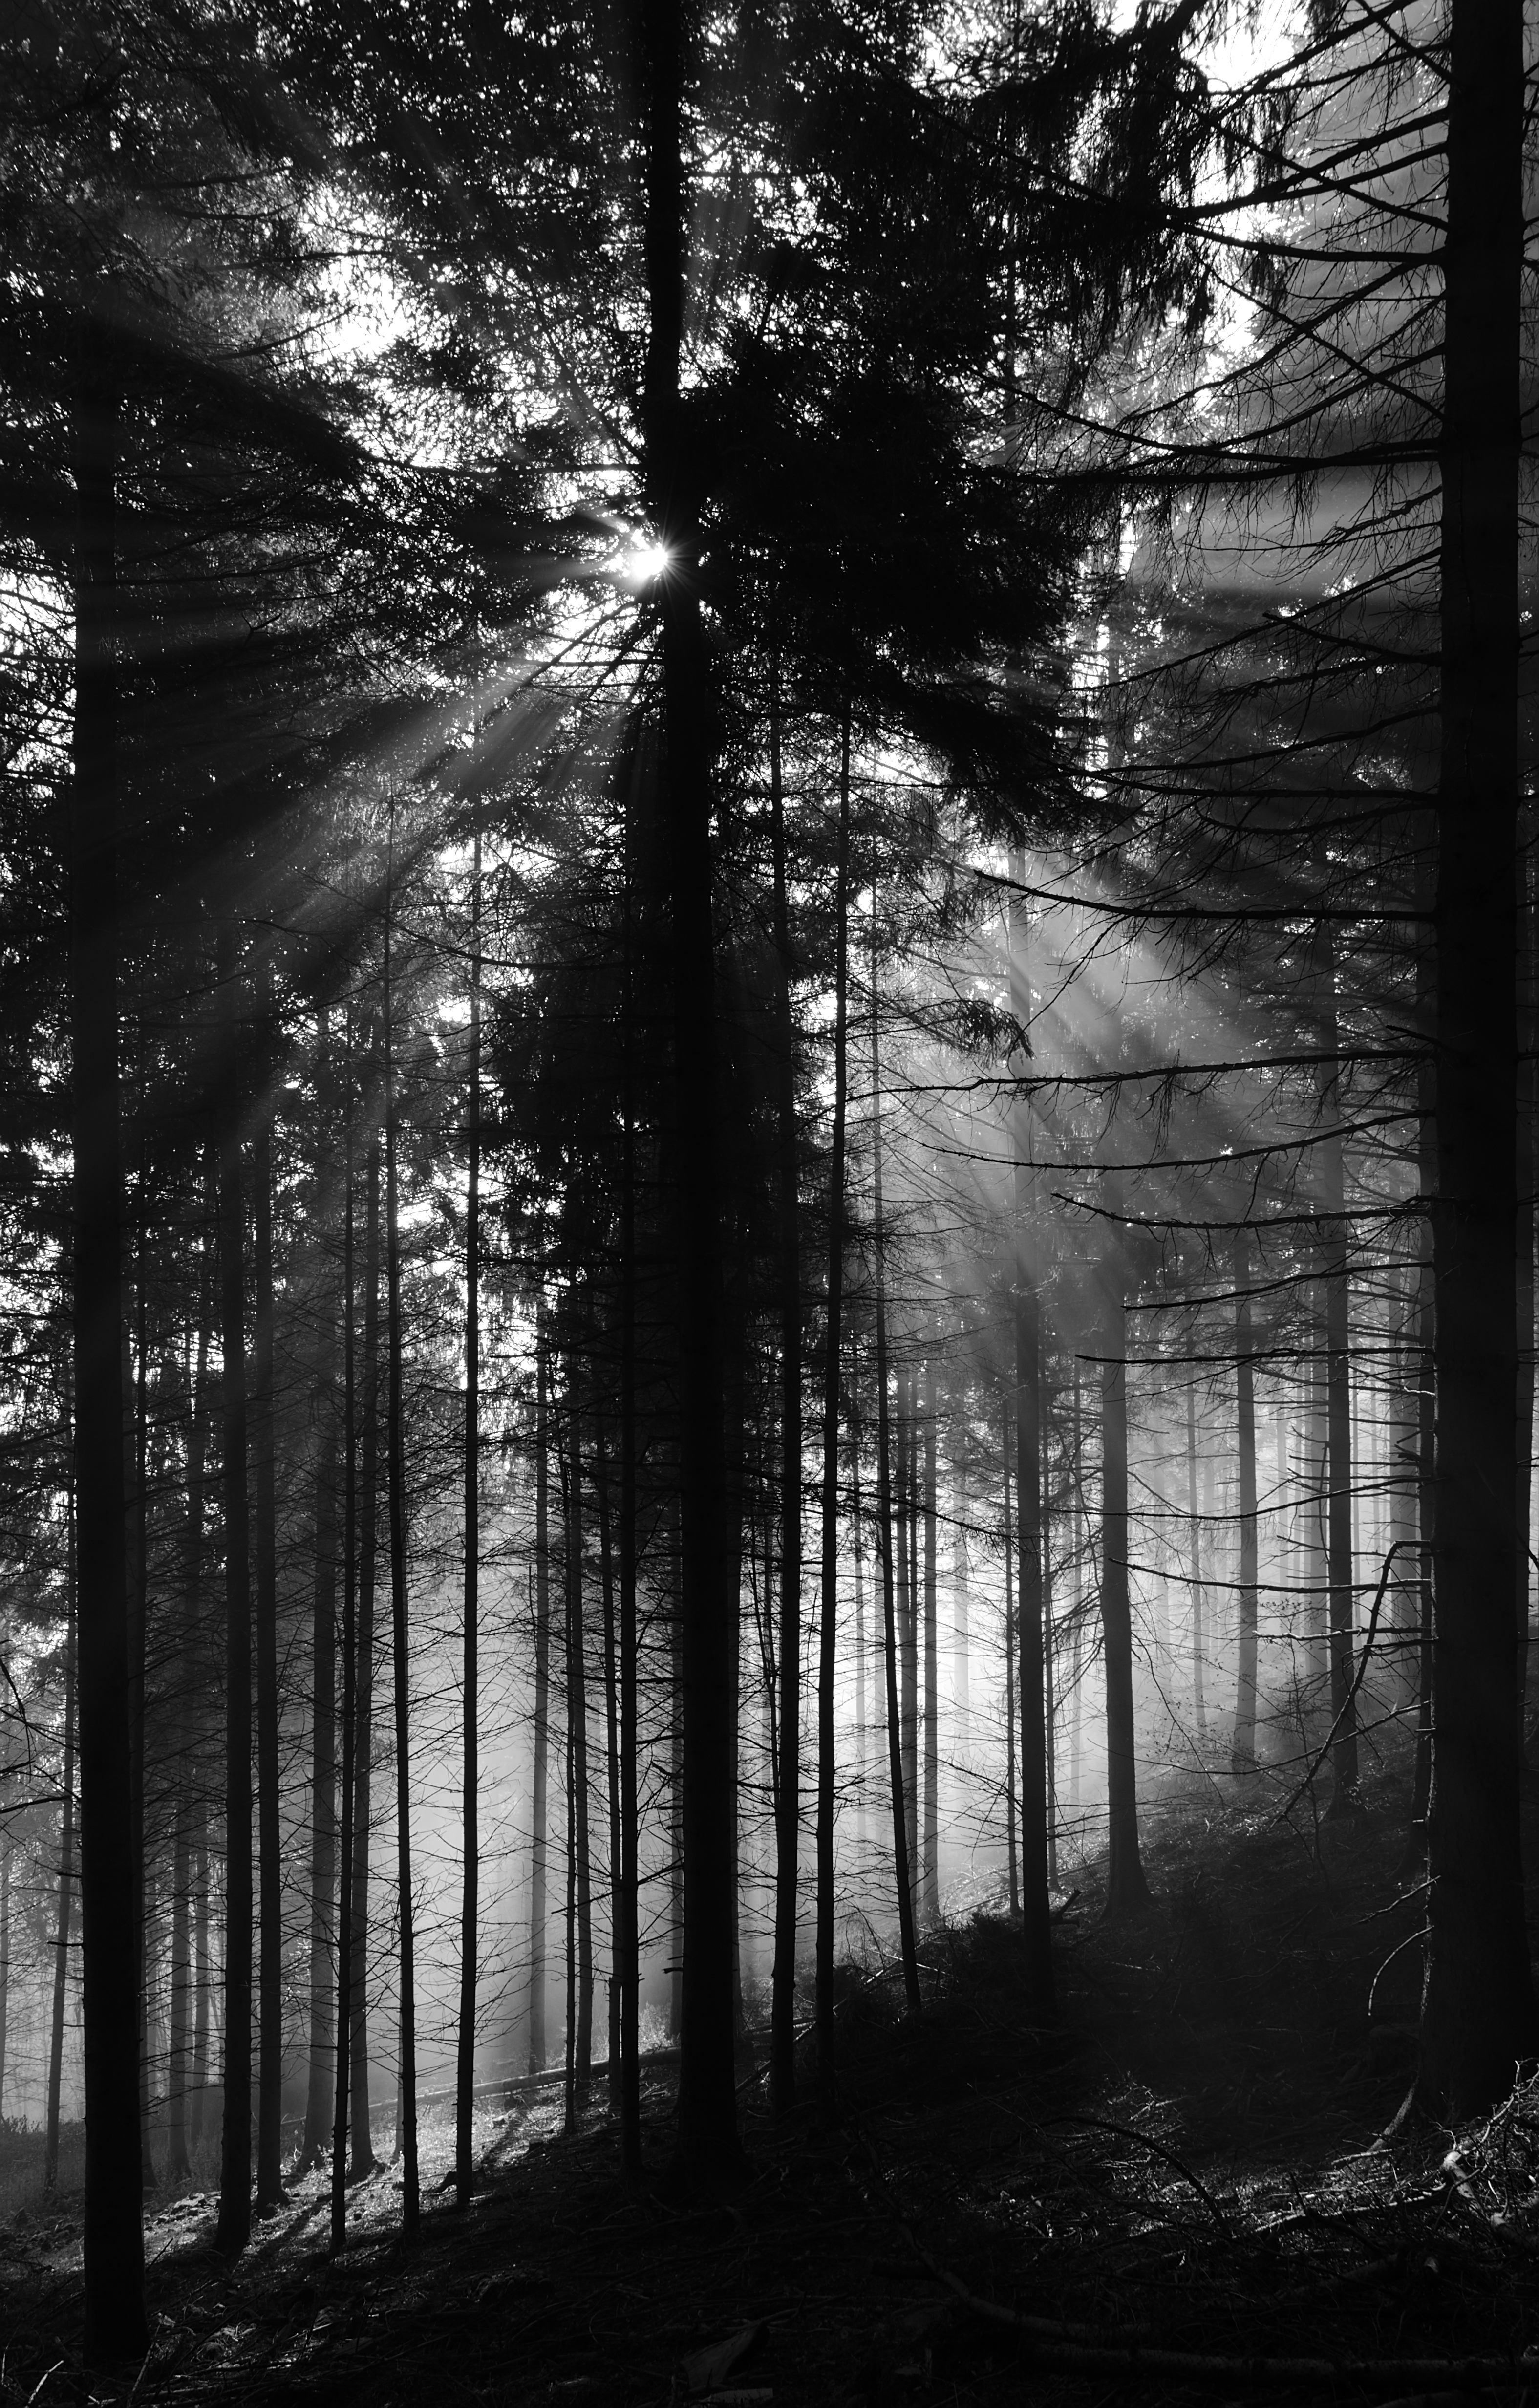 Wallpaper Full HD nature, trees, pine, beams, rays, forest, bw, chb